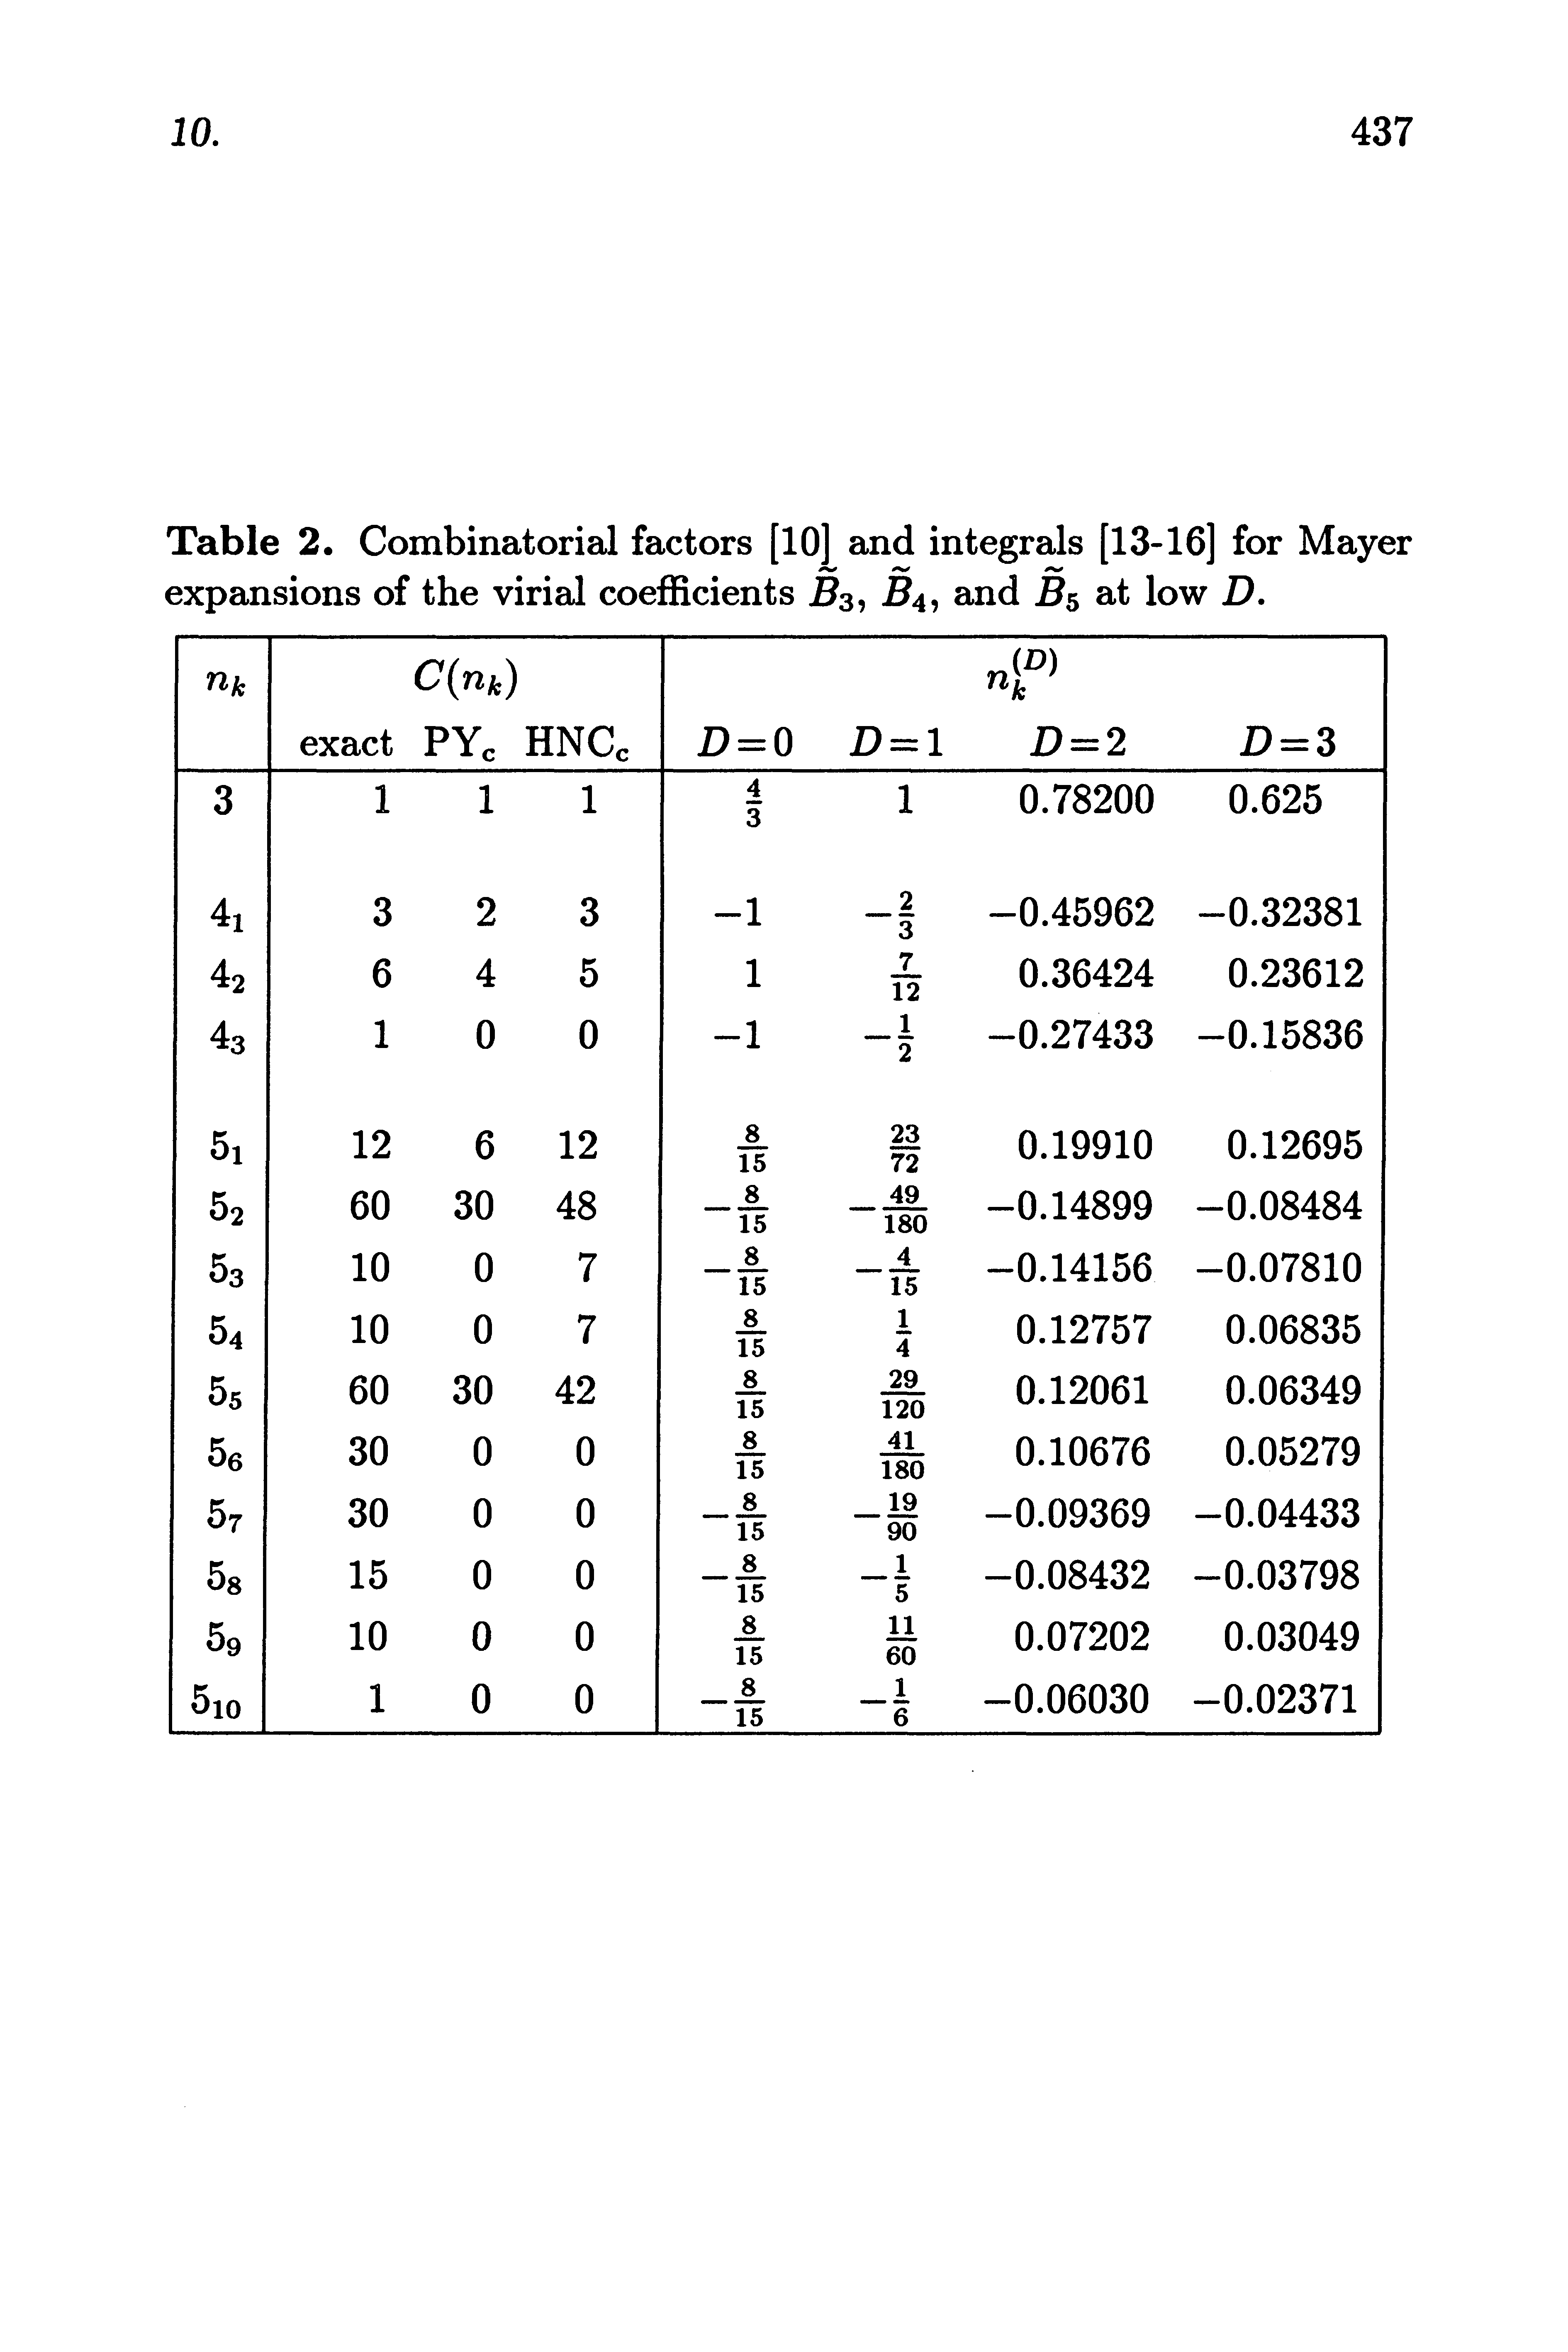 Table 2. Combinatorial factors [10] and integrals [13-16] for Mayer expansions of the virial coefficients B3, B4, and Bs at low D.